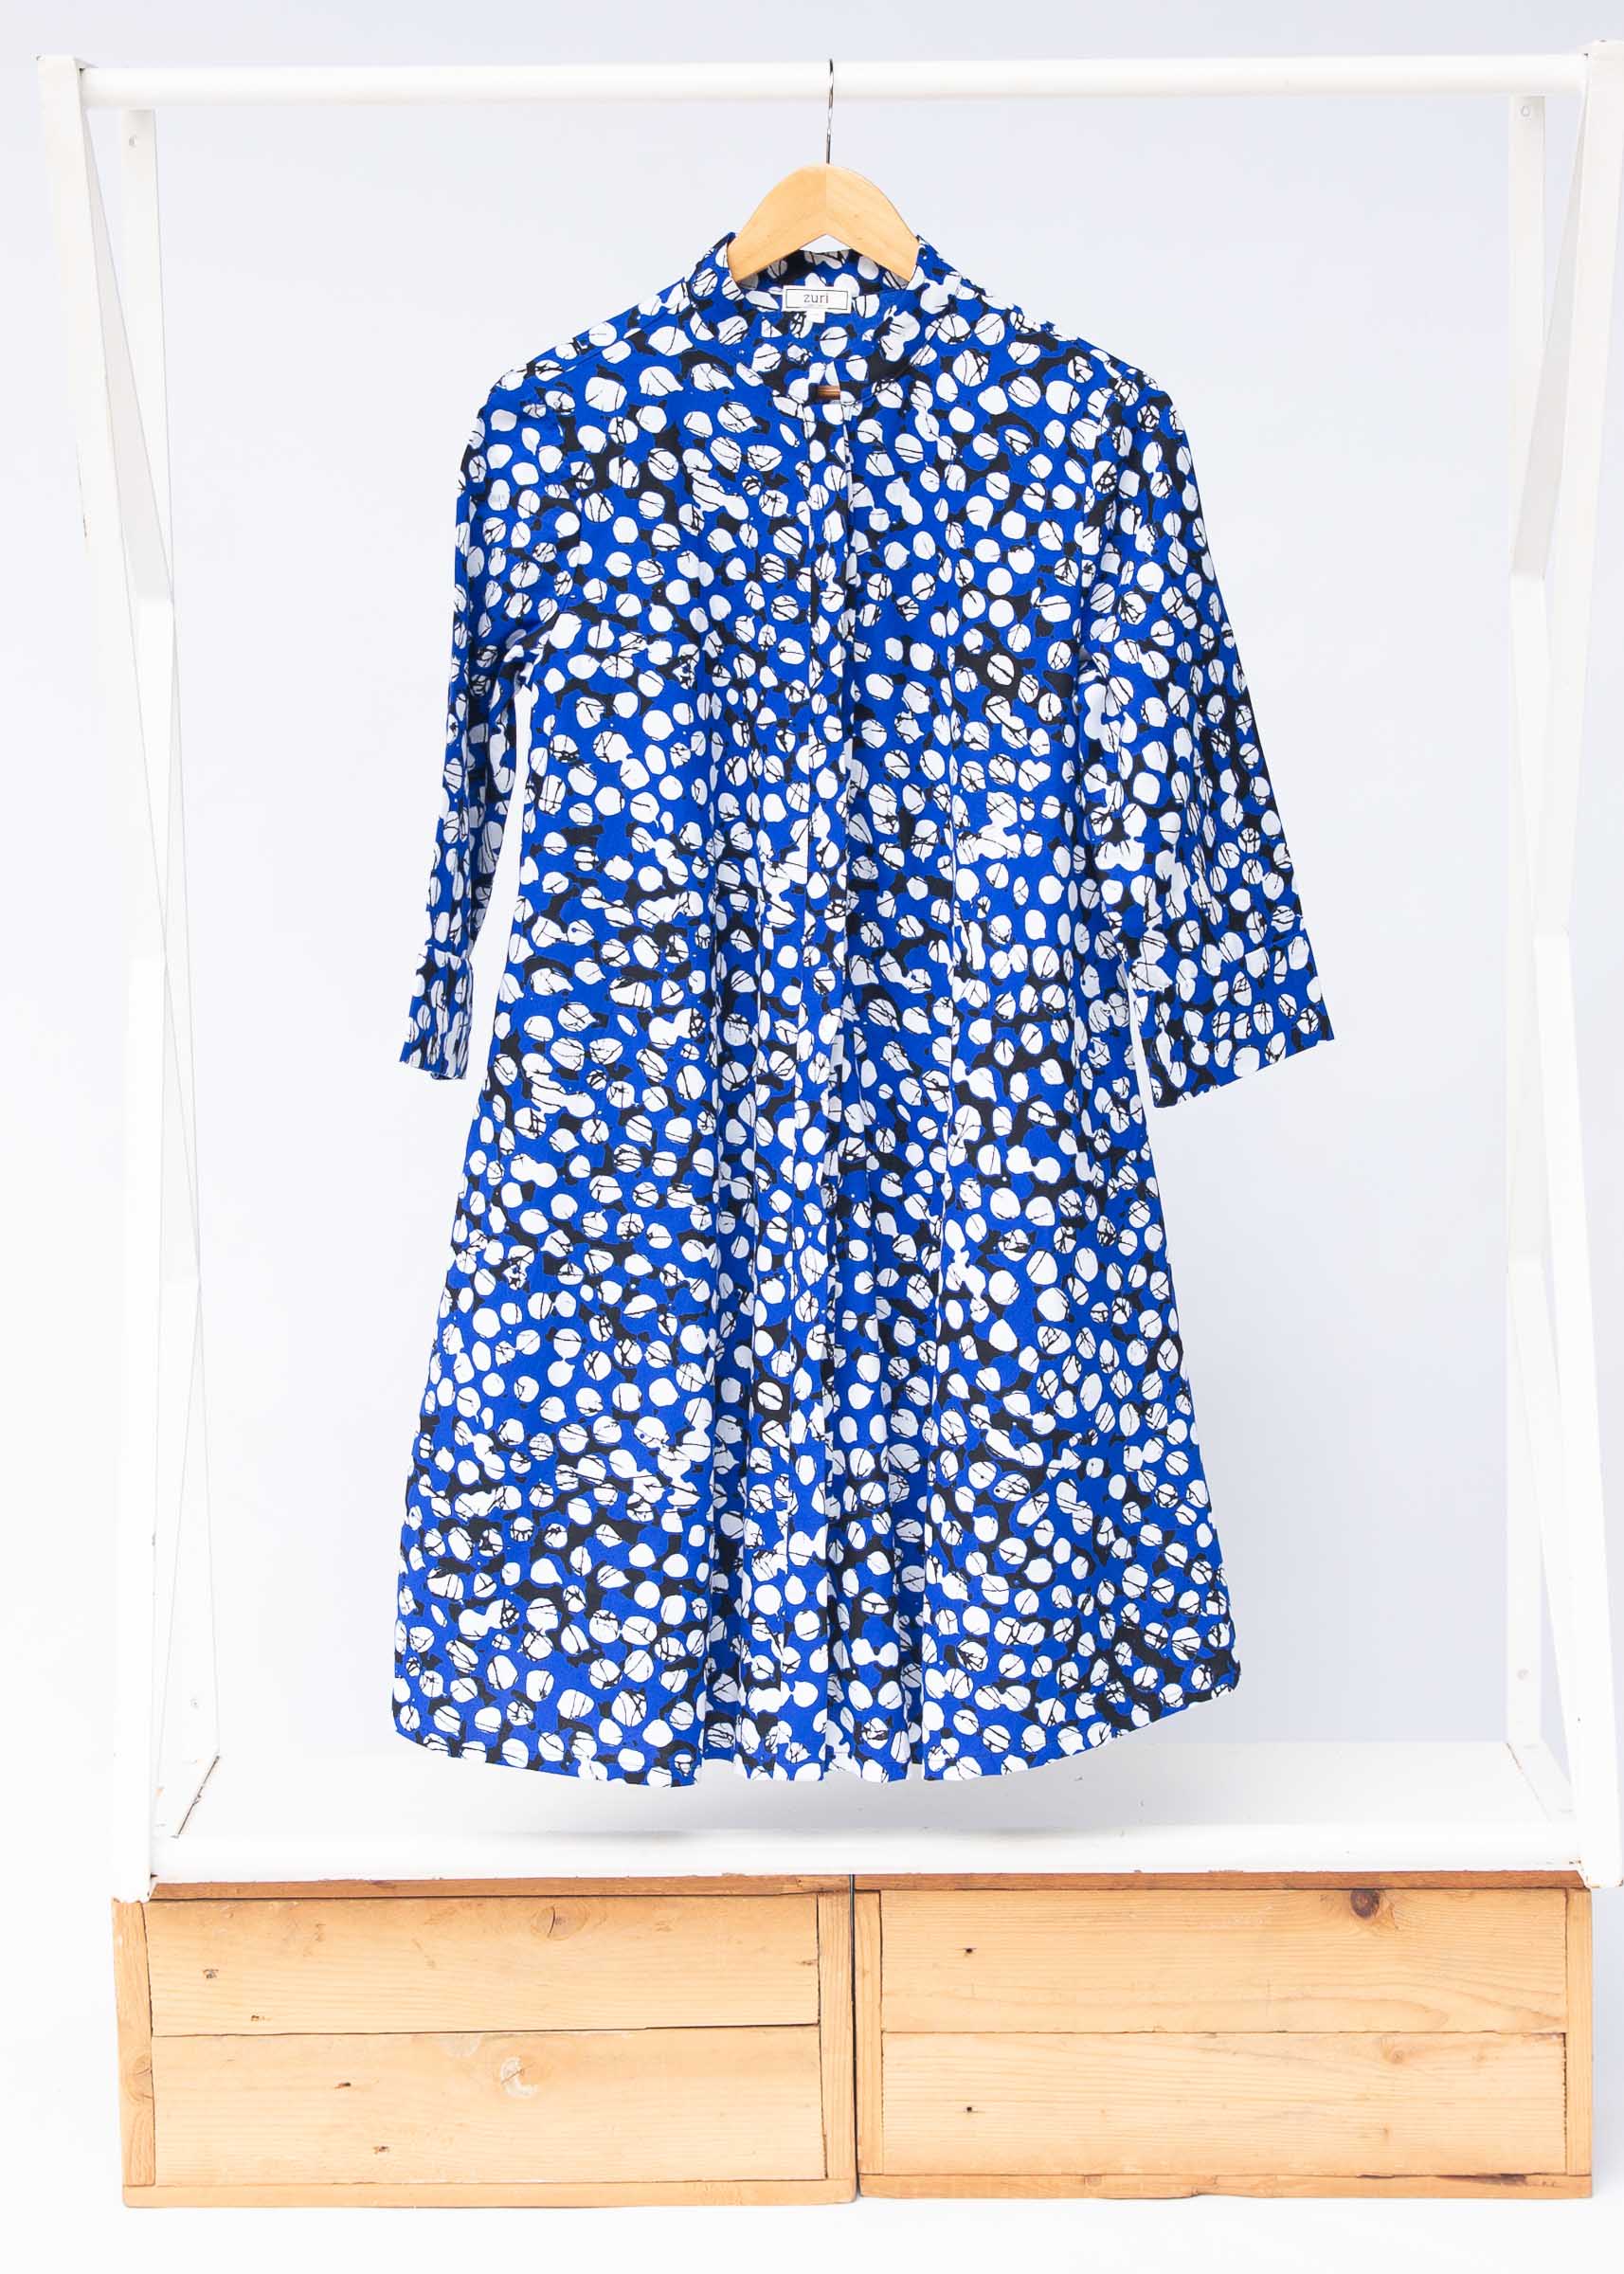 Display of blue dress with black and white abstract dots